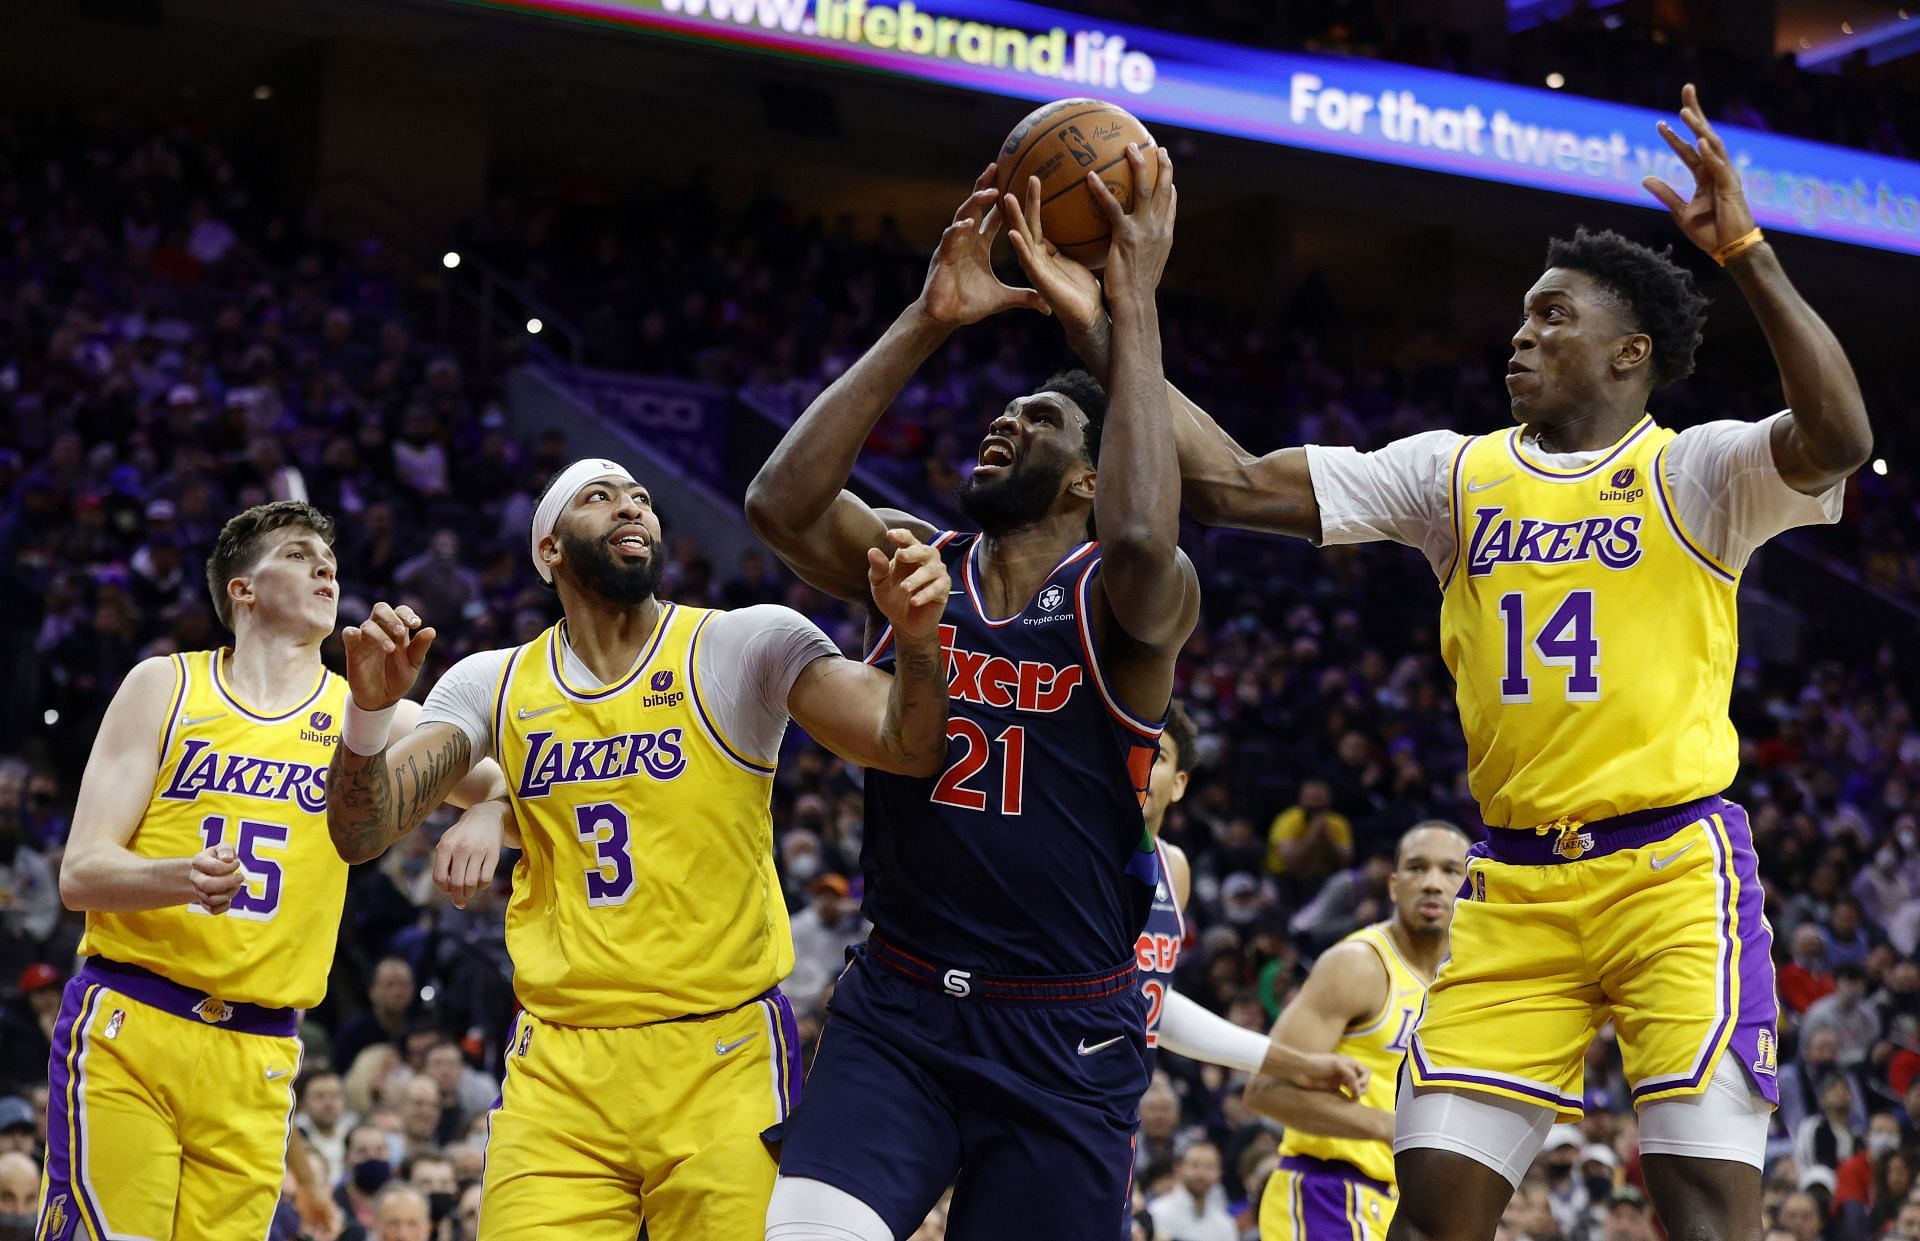 Joel Embiid of the Philadelphia 76ers against Anthony Davis and Stanley Johnson of the LA Lakers